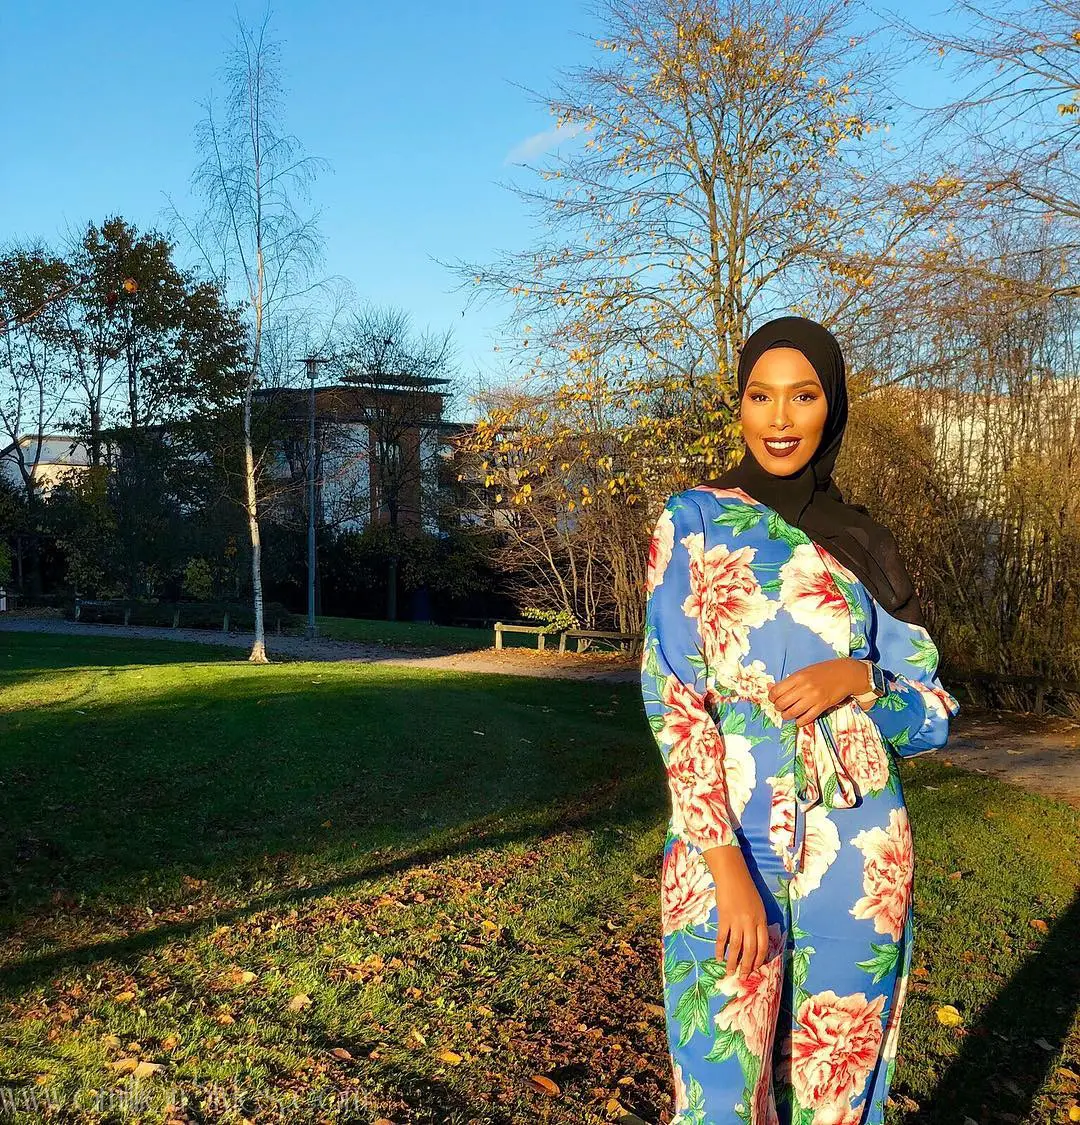 9 Perfect Styles For Muslim Women